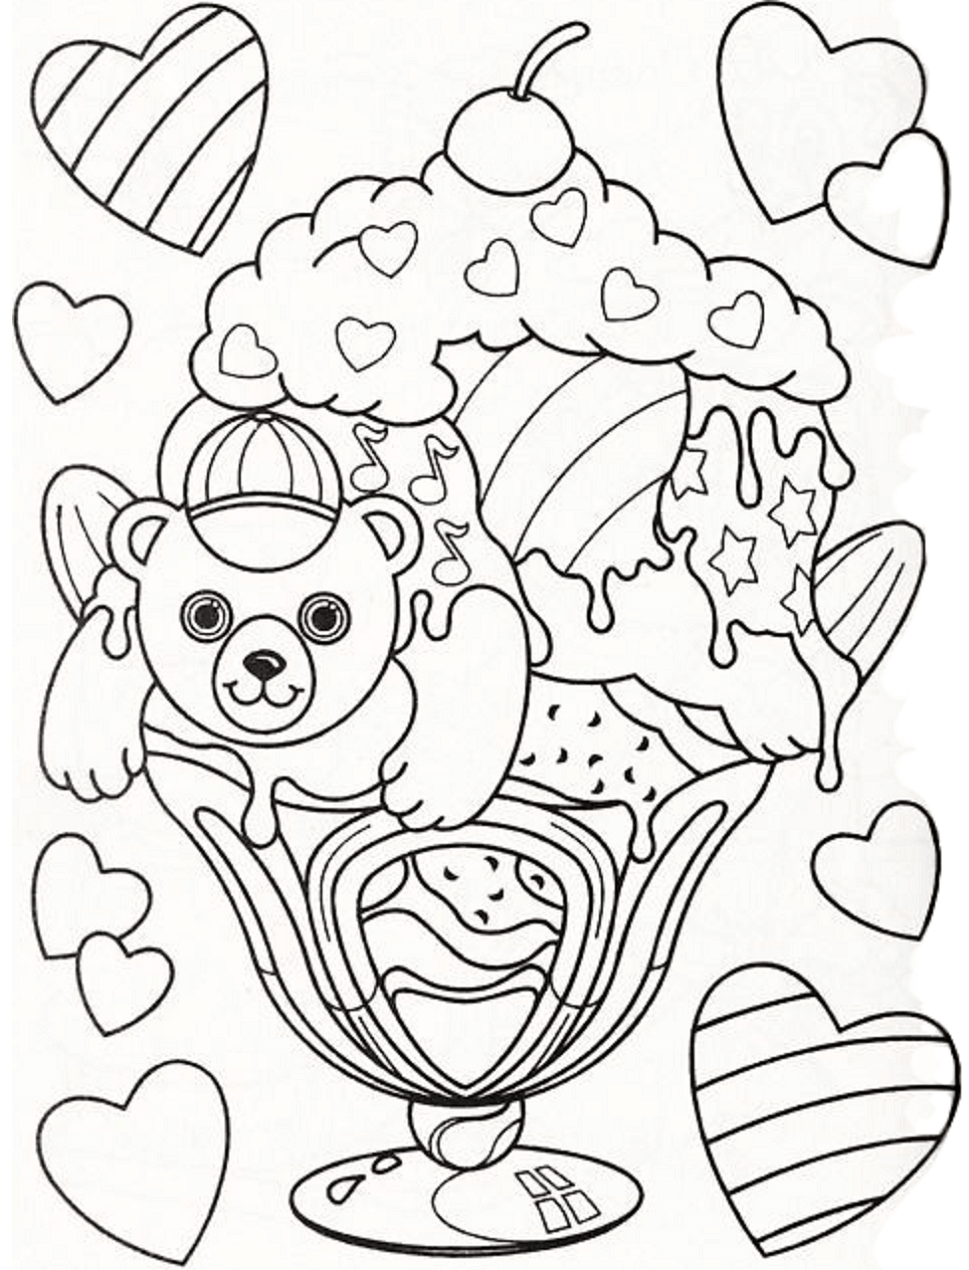 Hollywood Bear Lisa Frank Coloring Page Free Printable Coloring Pages